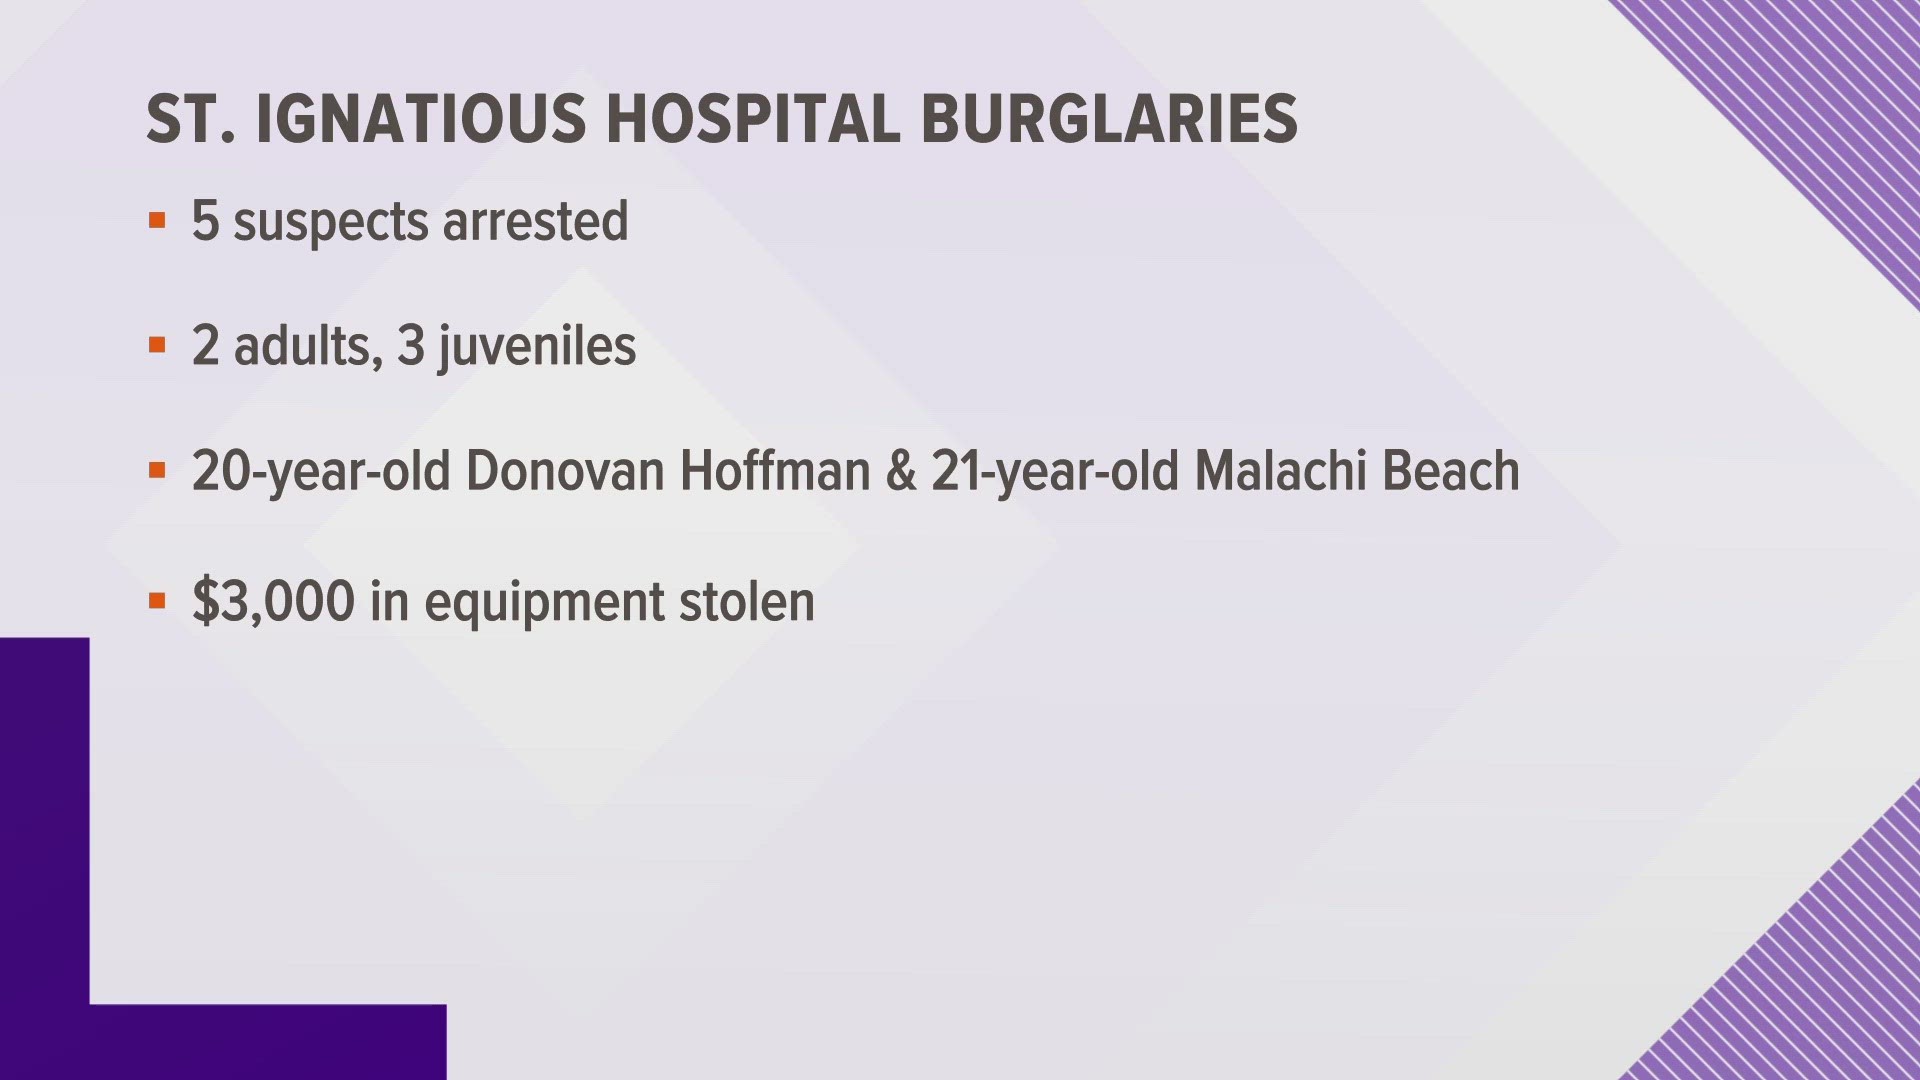 Two adults and three juveniles were arrested after stealing approximately $3,000 worth of hospital equipment, which has since been returned.